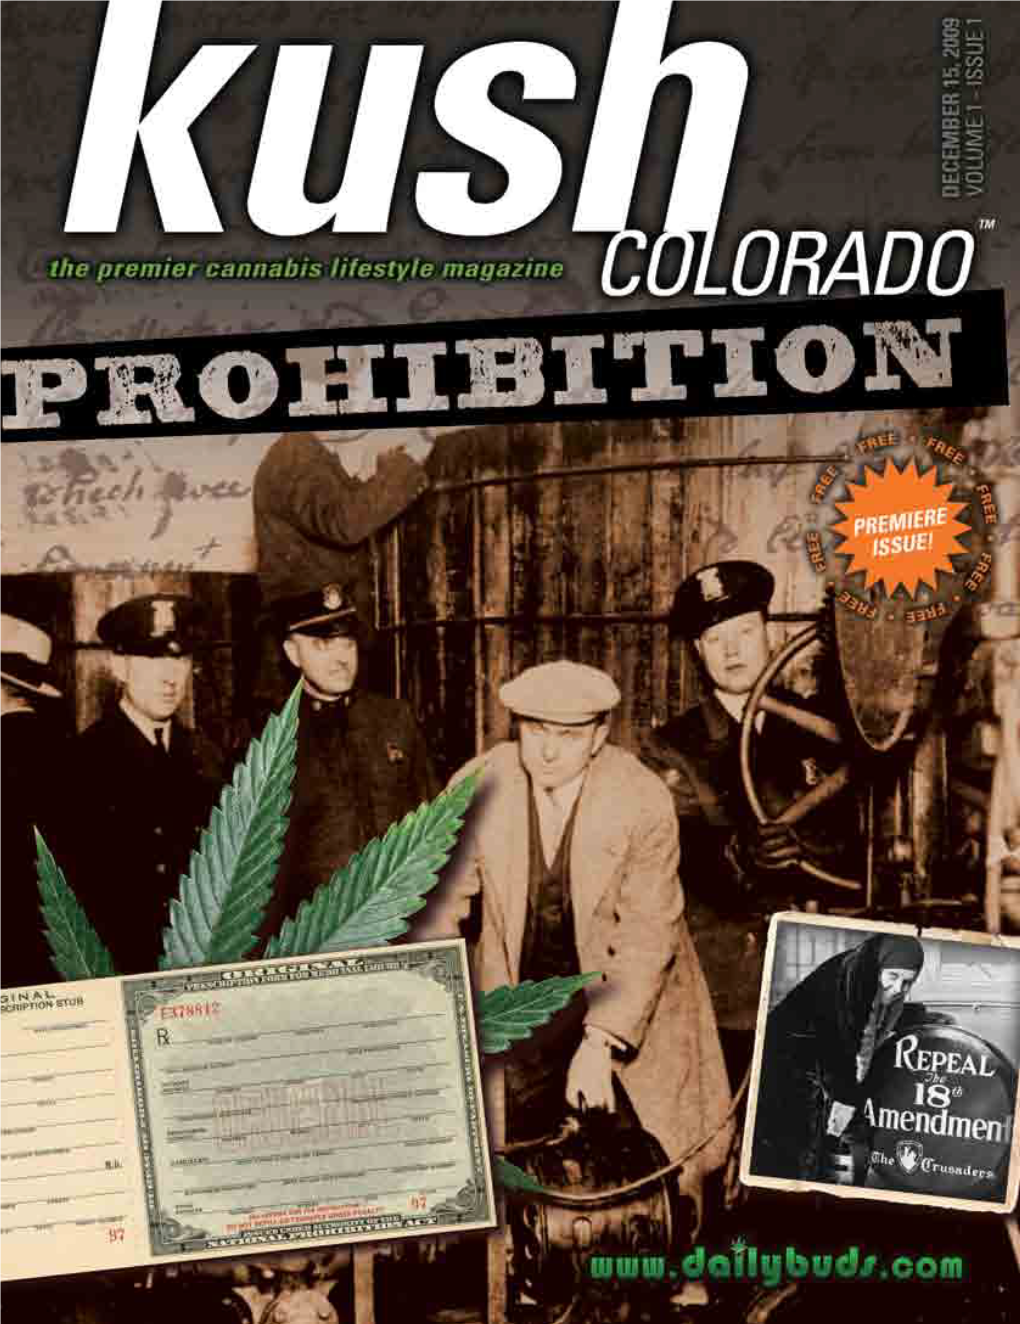 Kush Colorado Colorado from the Editor’S Kushcolorado Want to Thank You for Giving Us Such a We a Division of Dbdotcom LLC Warm Welcome to Colorado!